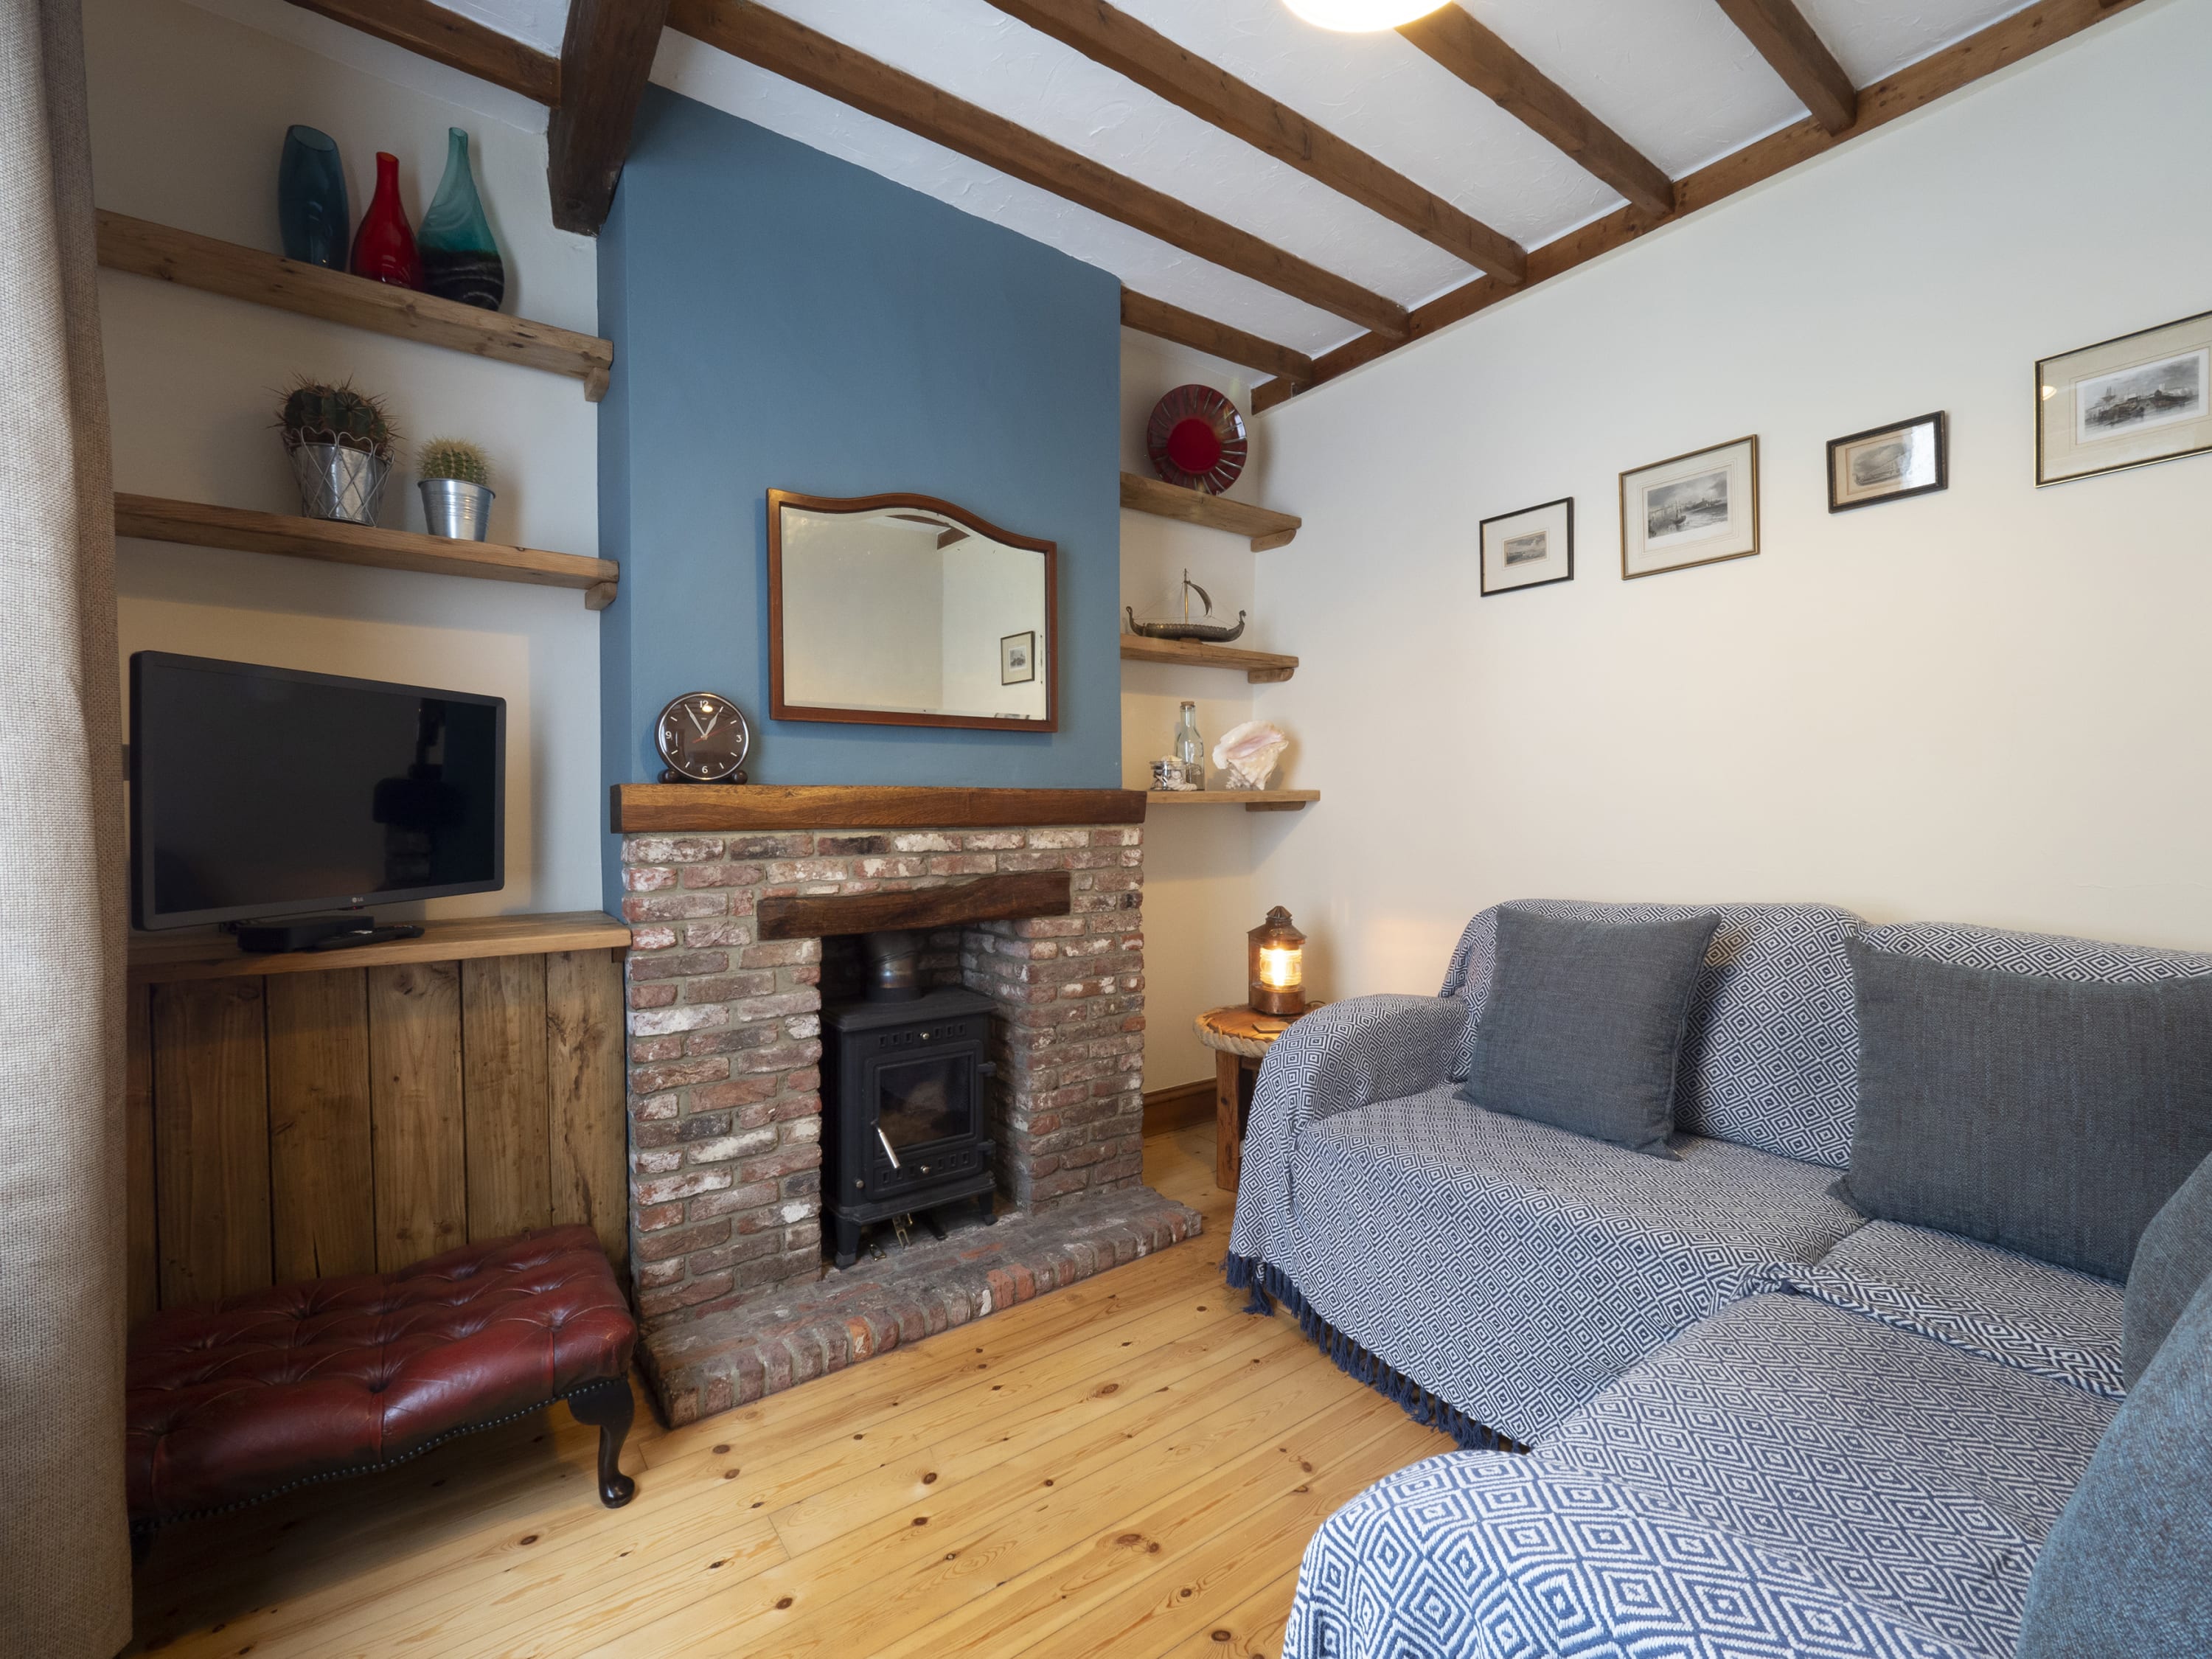 Property Image 1 - Ethelbert Cottage - Cosy seaside retreat in the heart of Broadstairs